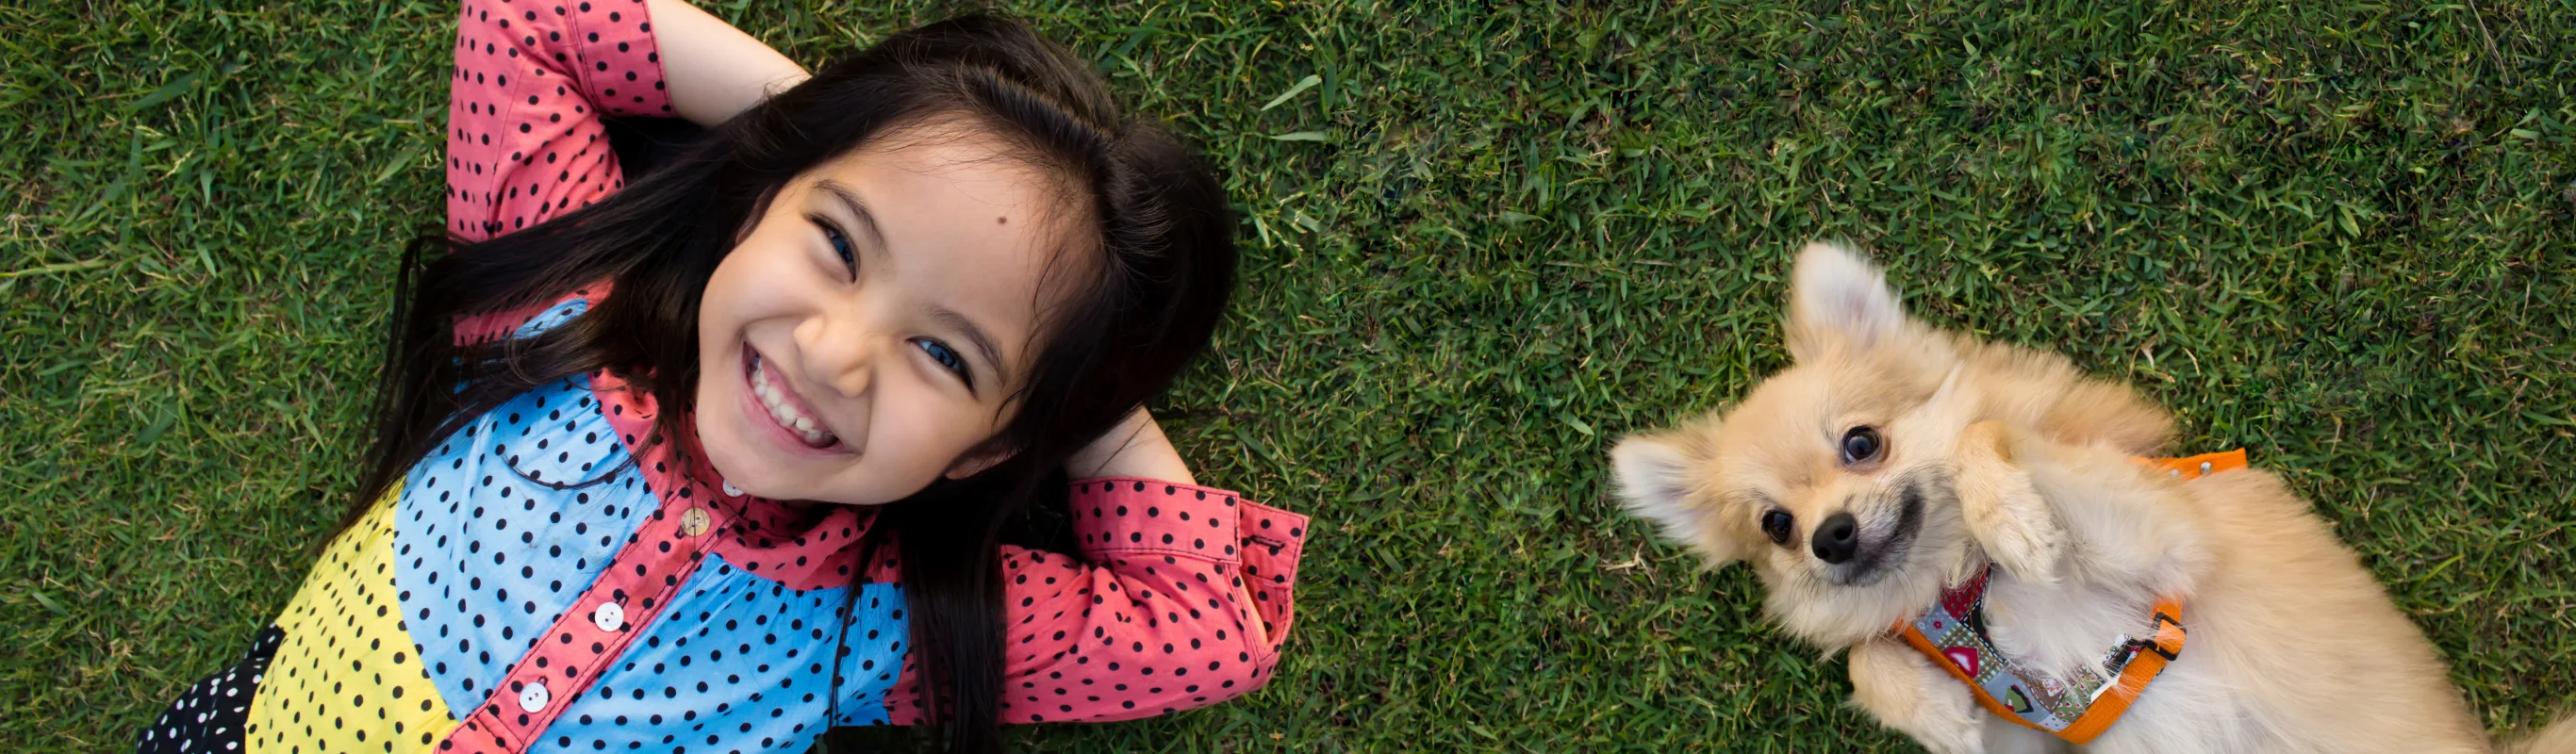 little girl laying on a lawn with a dog